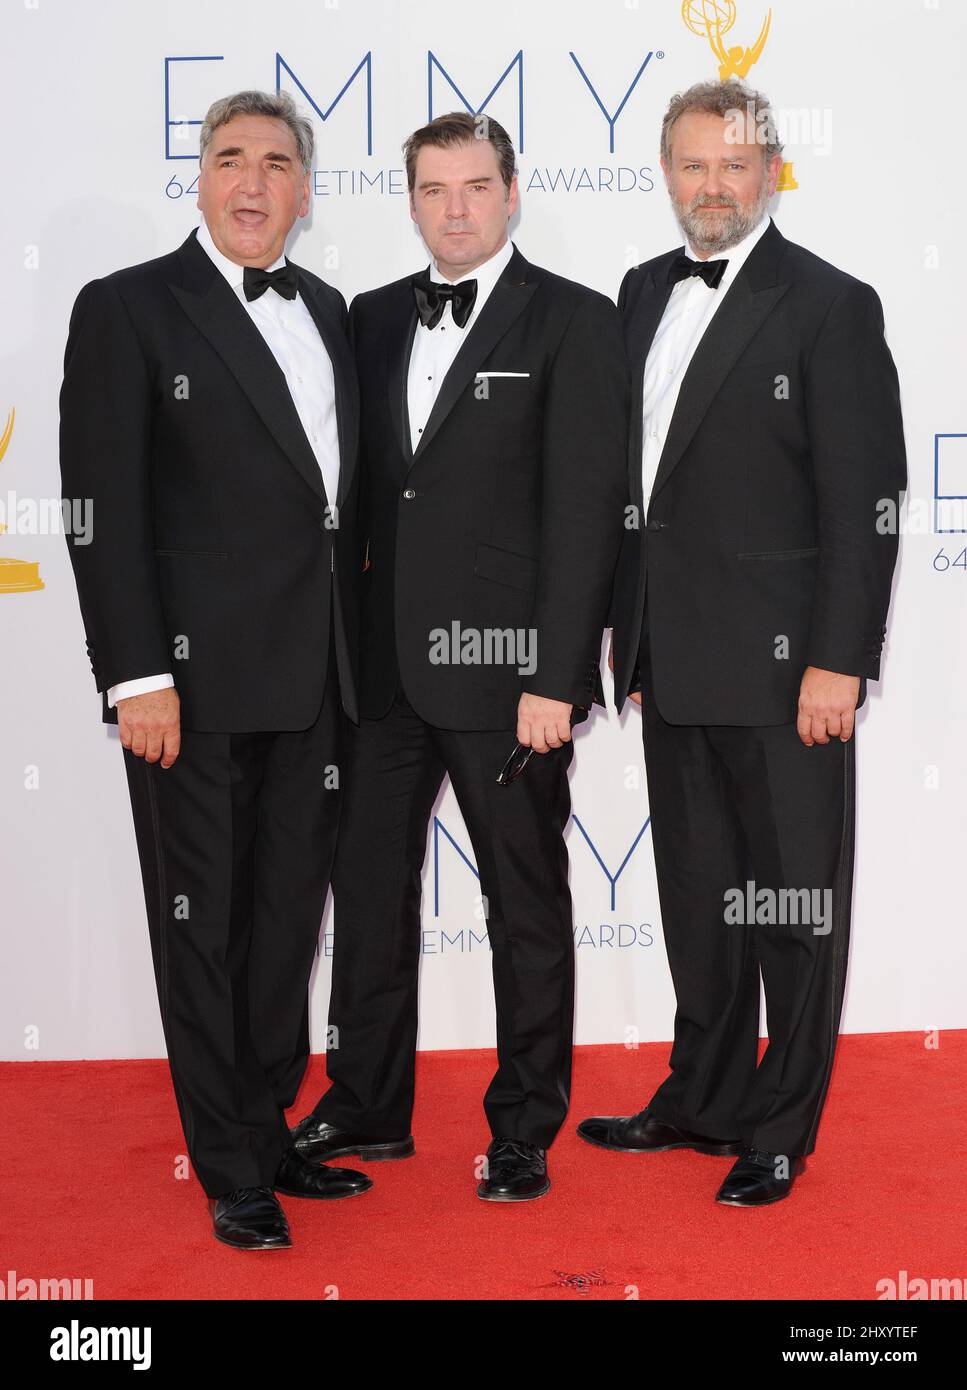 Jim Carter, Hugh Bonneville and Brendan Coyle attends the 64th Primetime Emmy Awards held at the Nokia Theatre, Los Angeles. Stock Photo